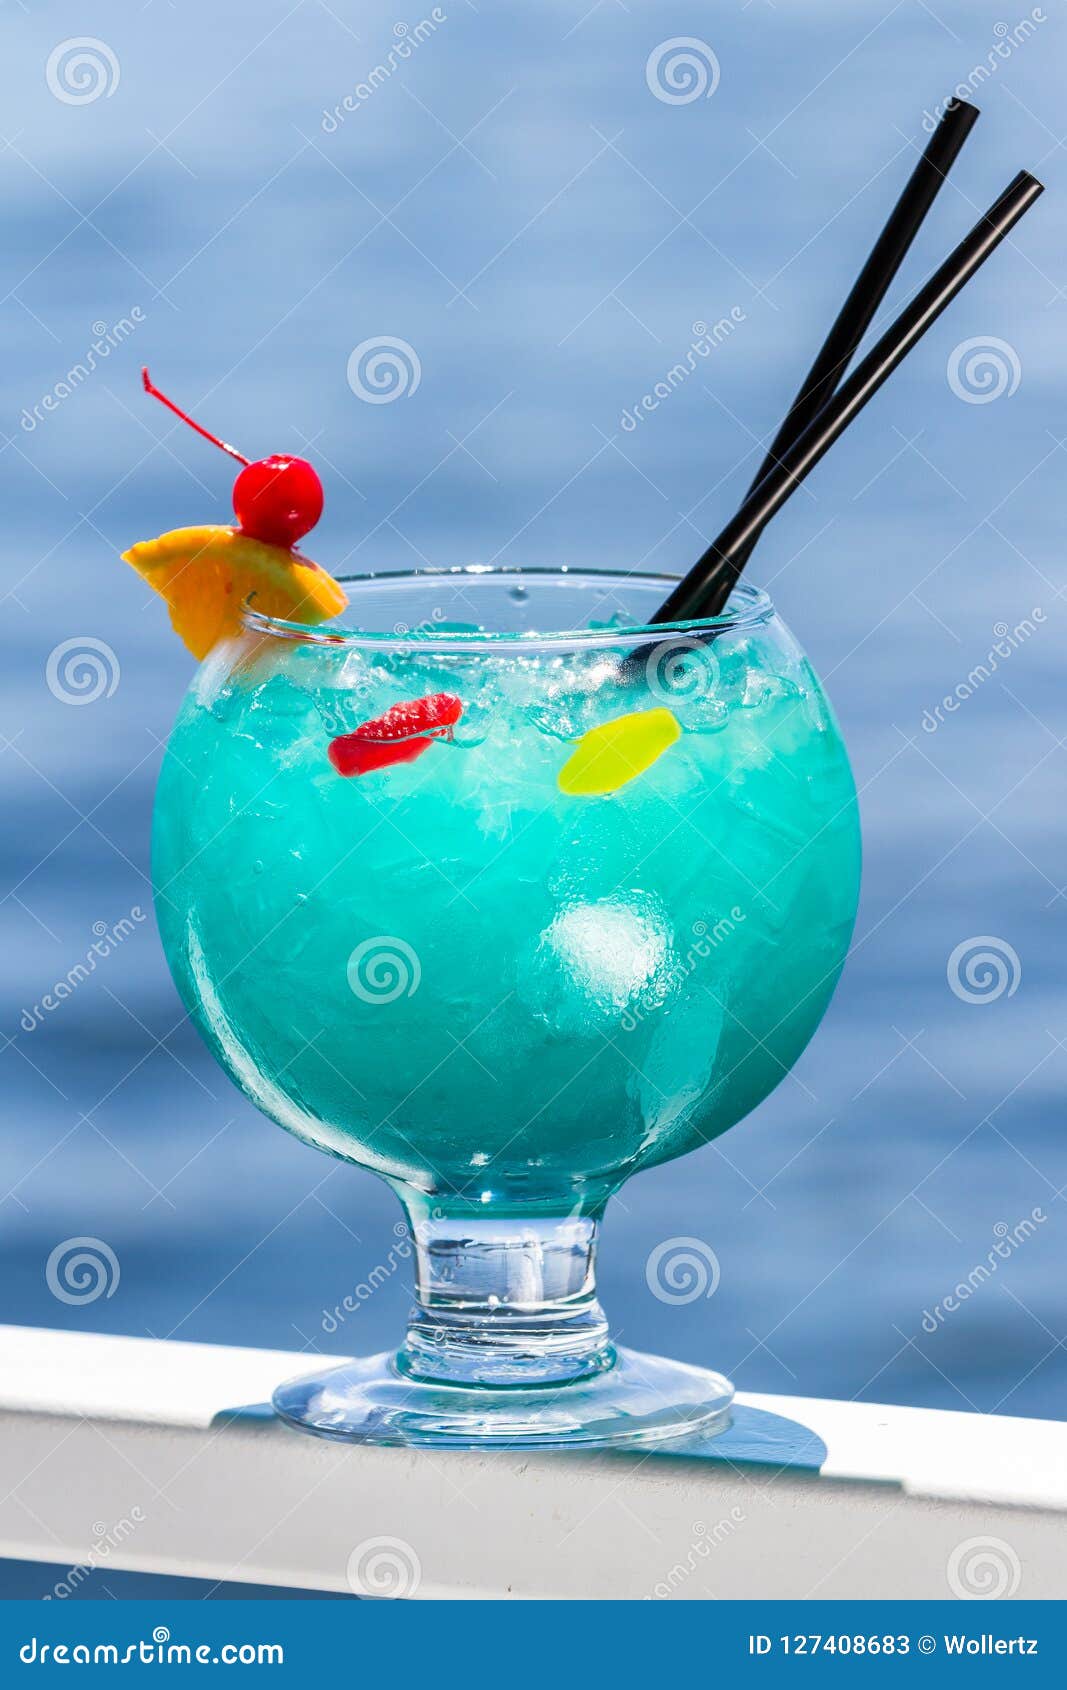 Fish Bowl cocktail stock image. Image of drink, goblet ...